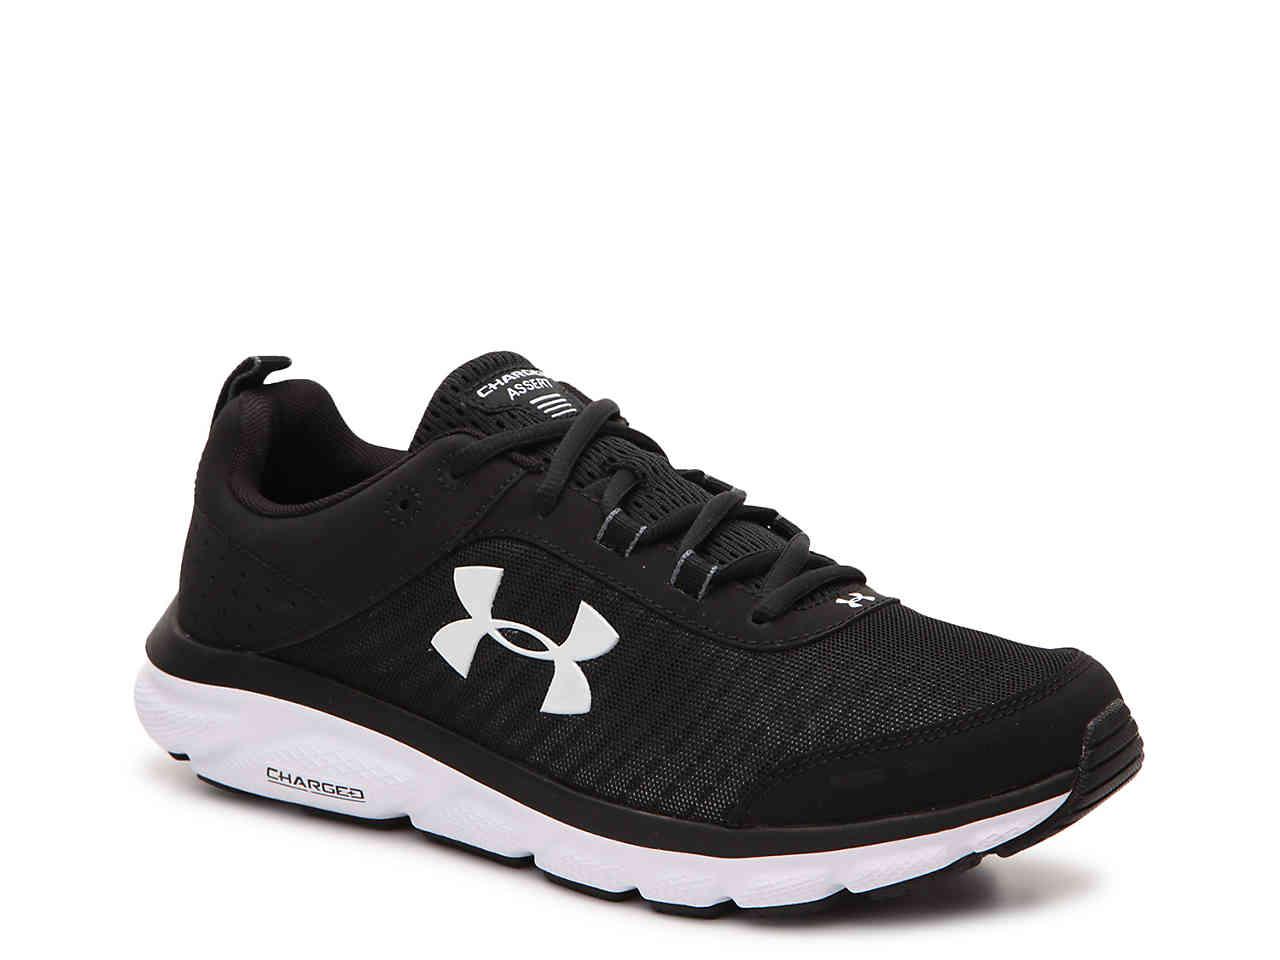 Under Armour Charged Assert 8 Running Shoe in Black for Men - Lyst